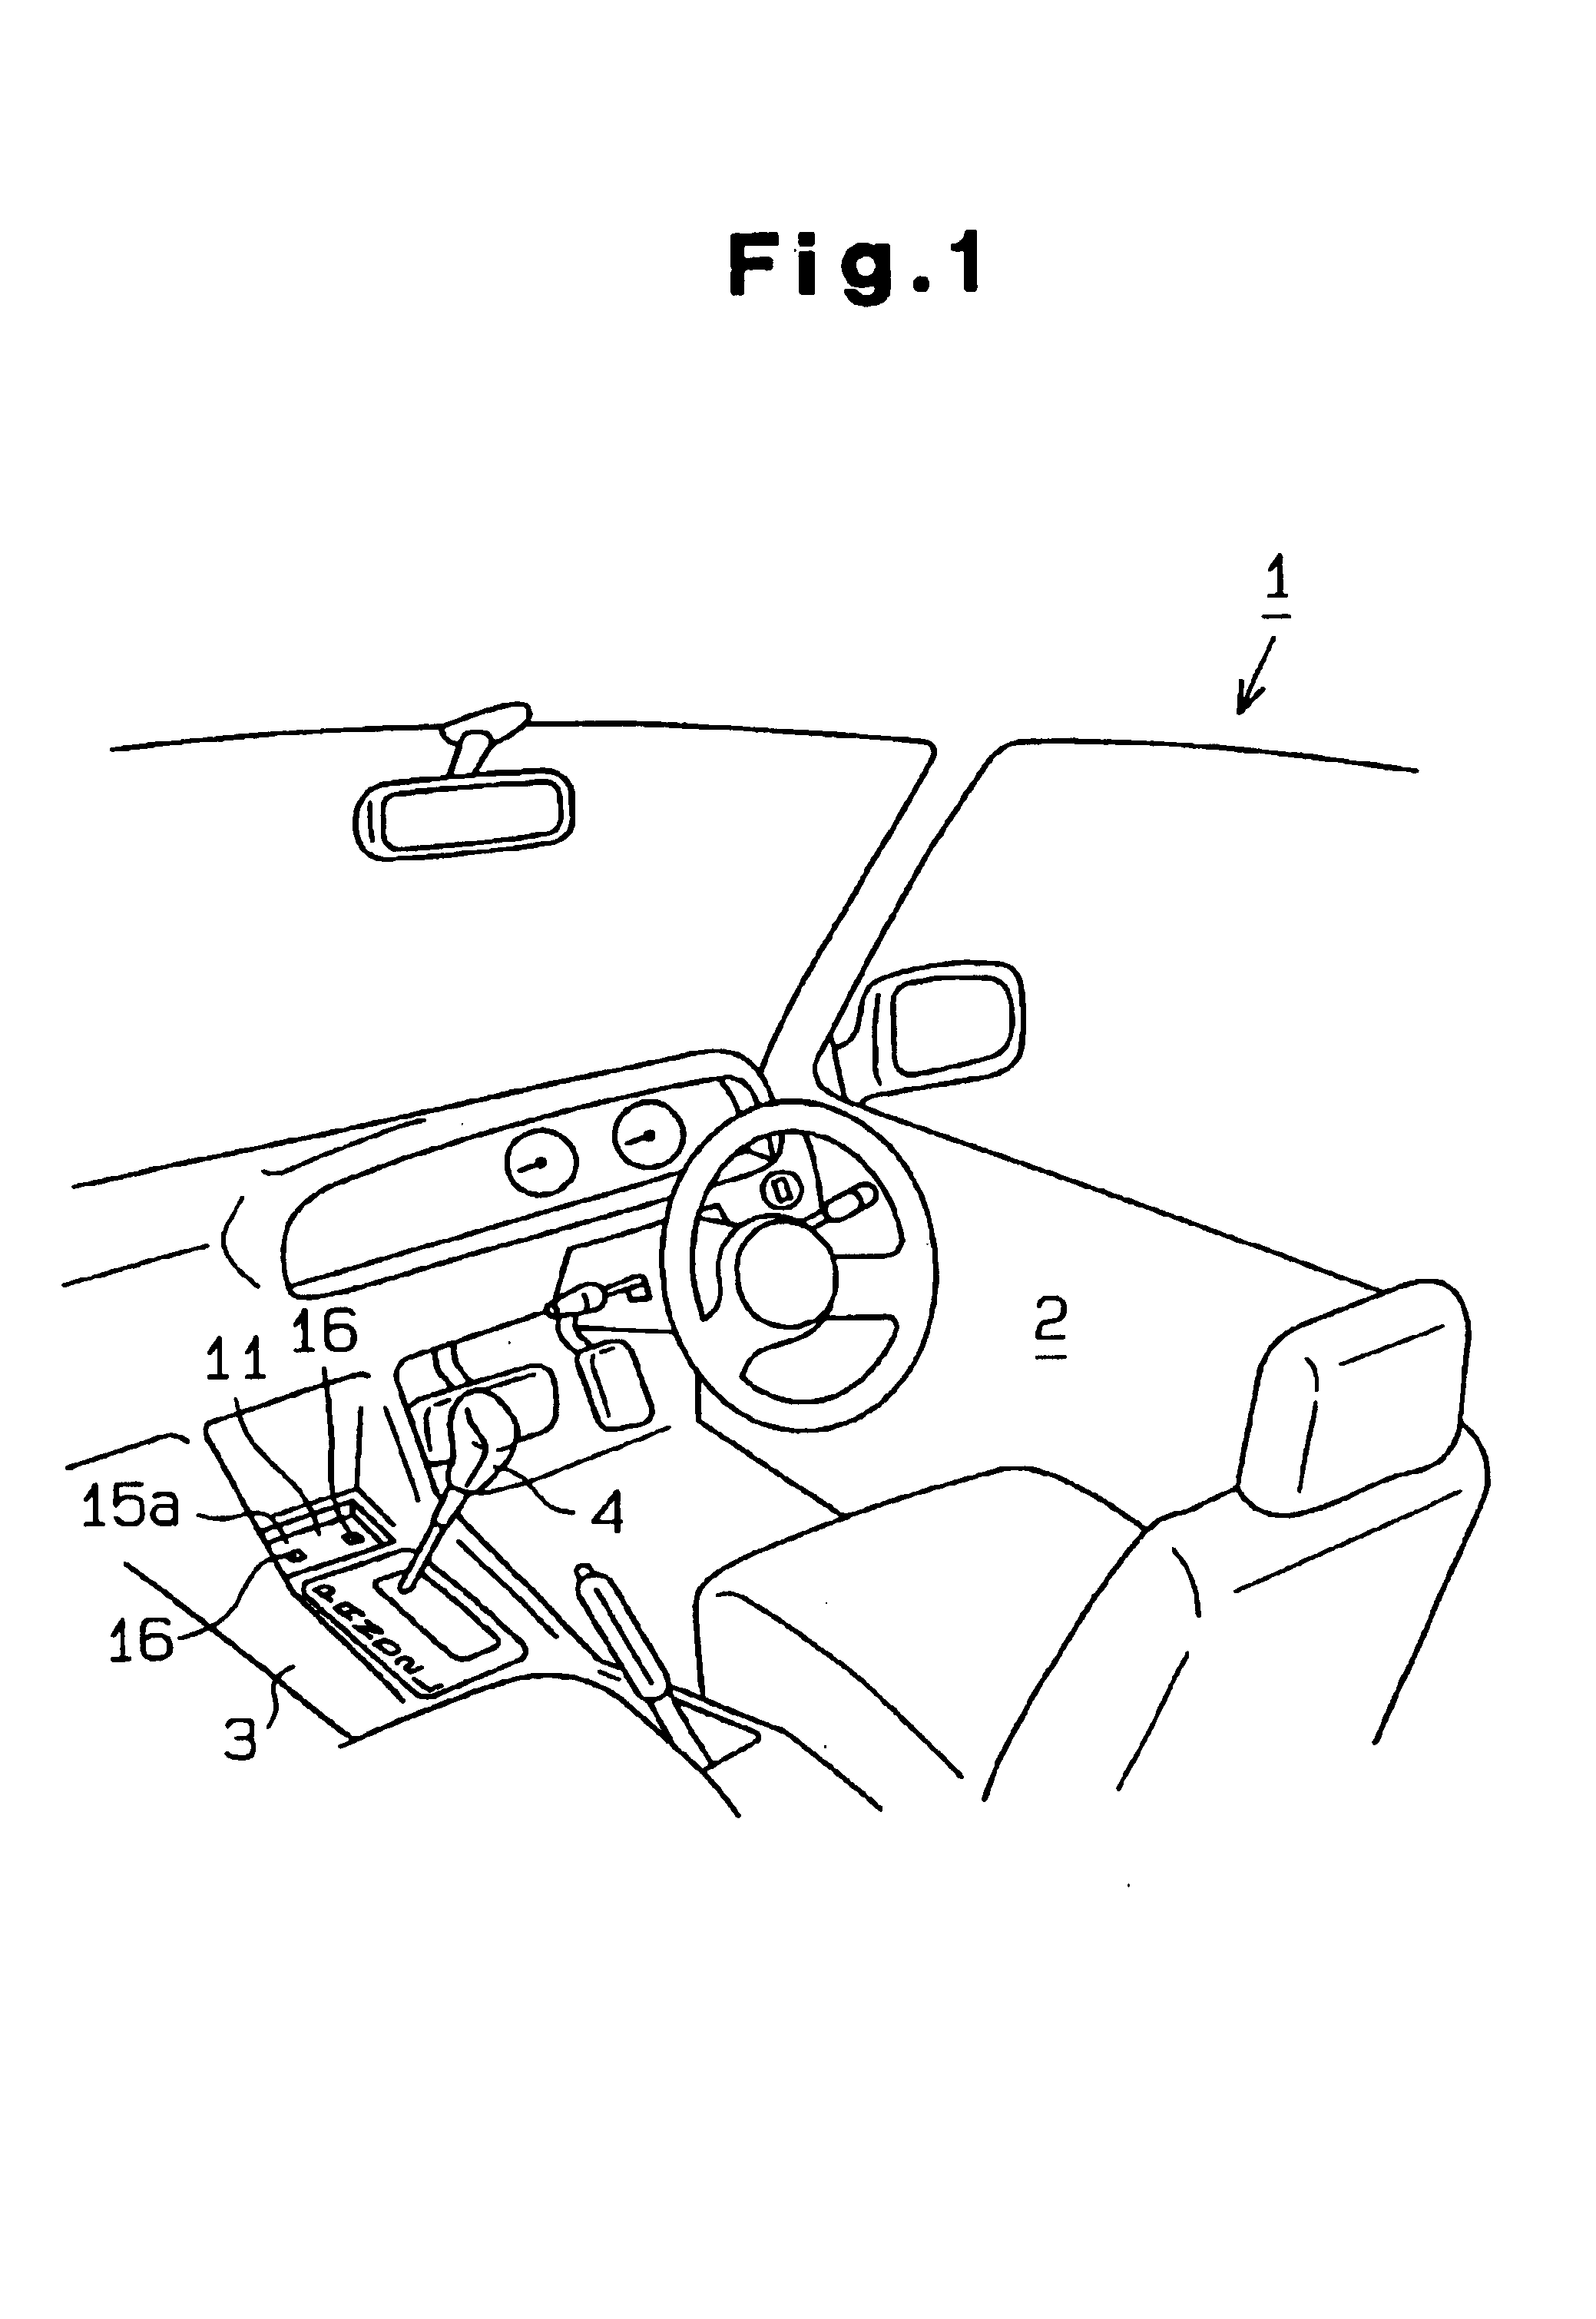 Vehicle remote controller